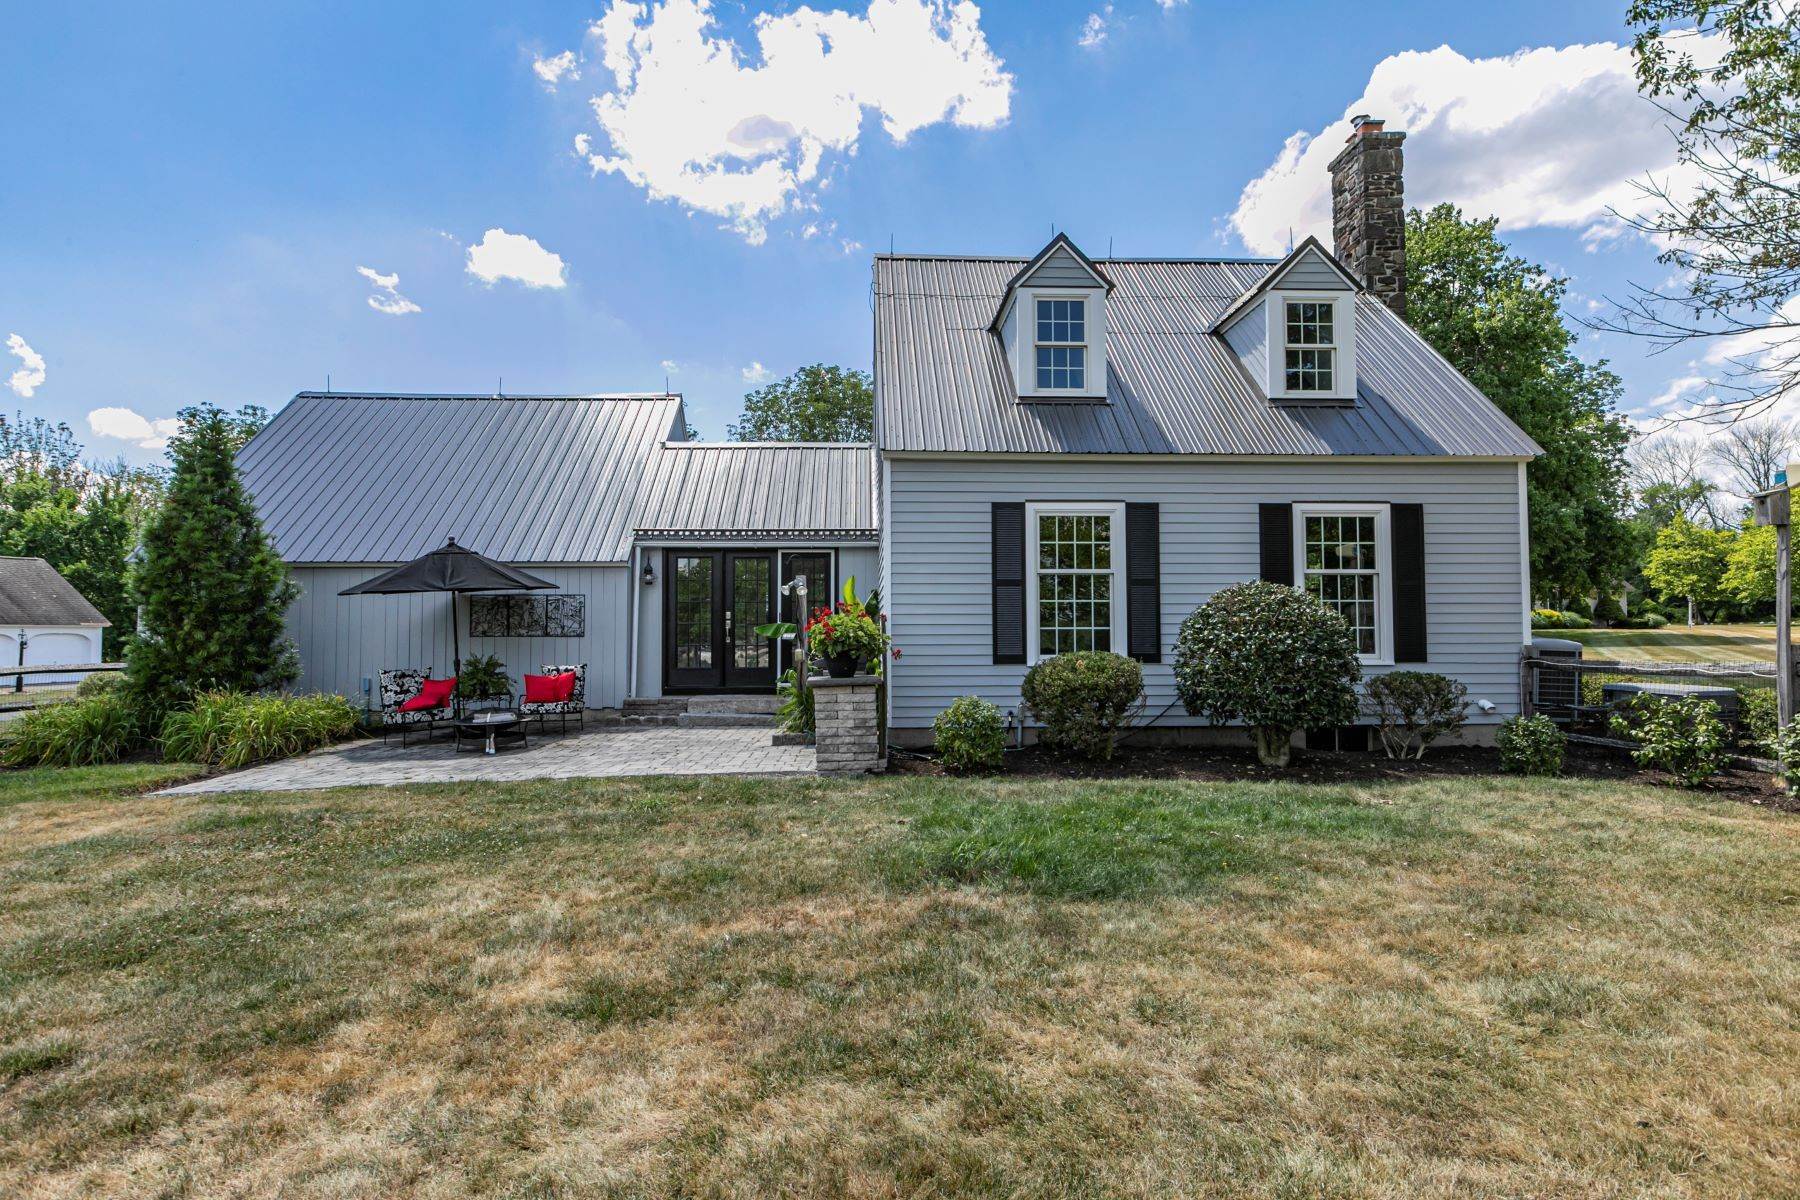 Single Family Homes for Sale at Classic Thompson Design Overlooking Coventry Farm 5 Coventry Farm Lane, Princeton, New Jersey 08540 United States